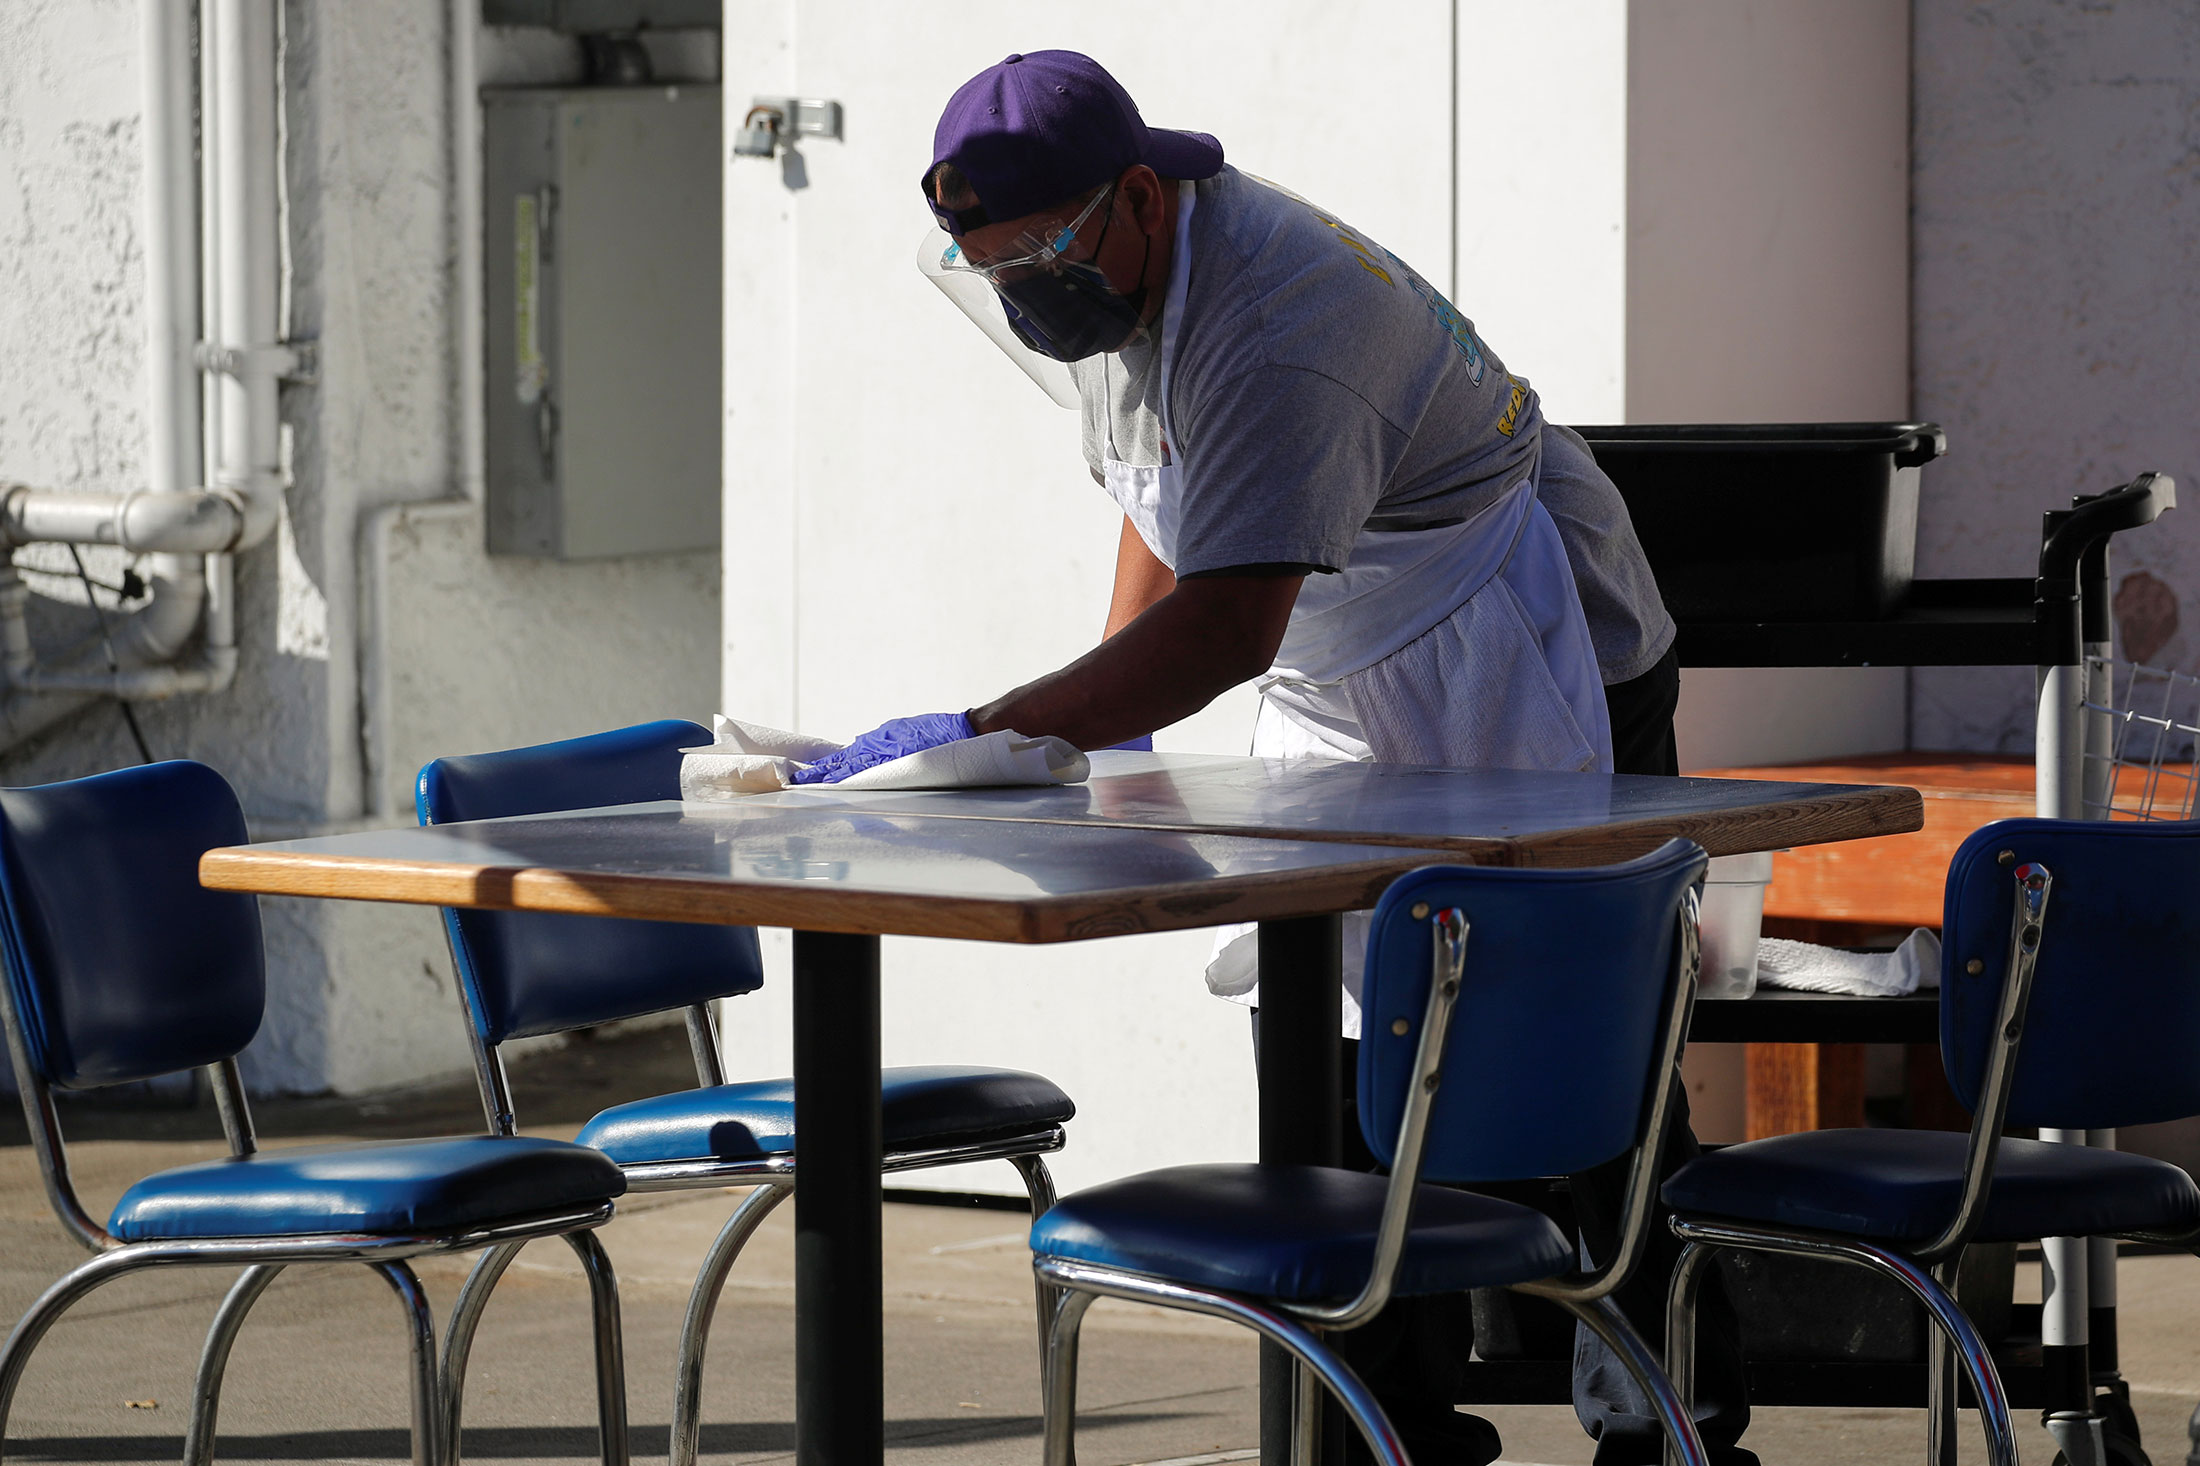 A worker cleans a sidewalk table outside Eat at Joe’s restaurant in Redondo Beach, Calif., on Nov. 30, 2020.